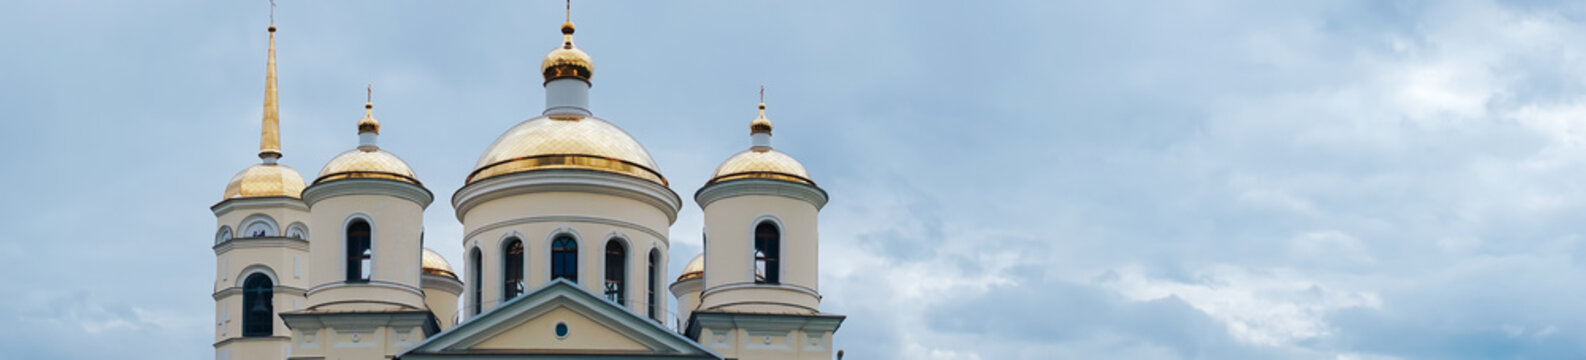 panorama of the church in the blue sky with white clouds